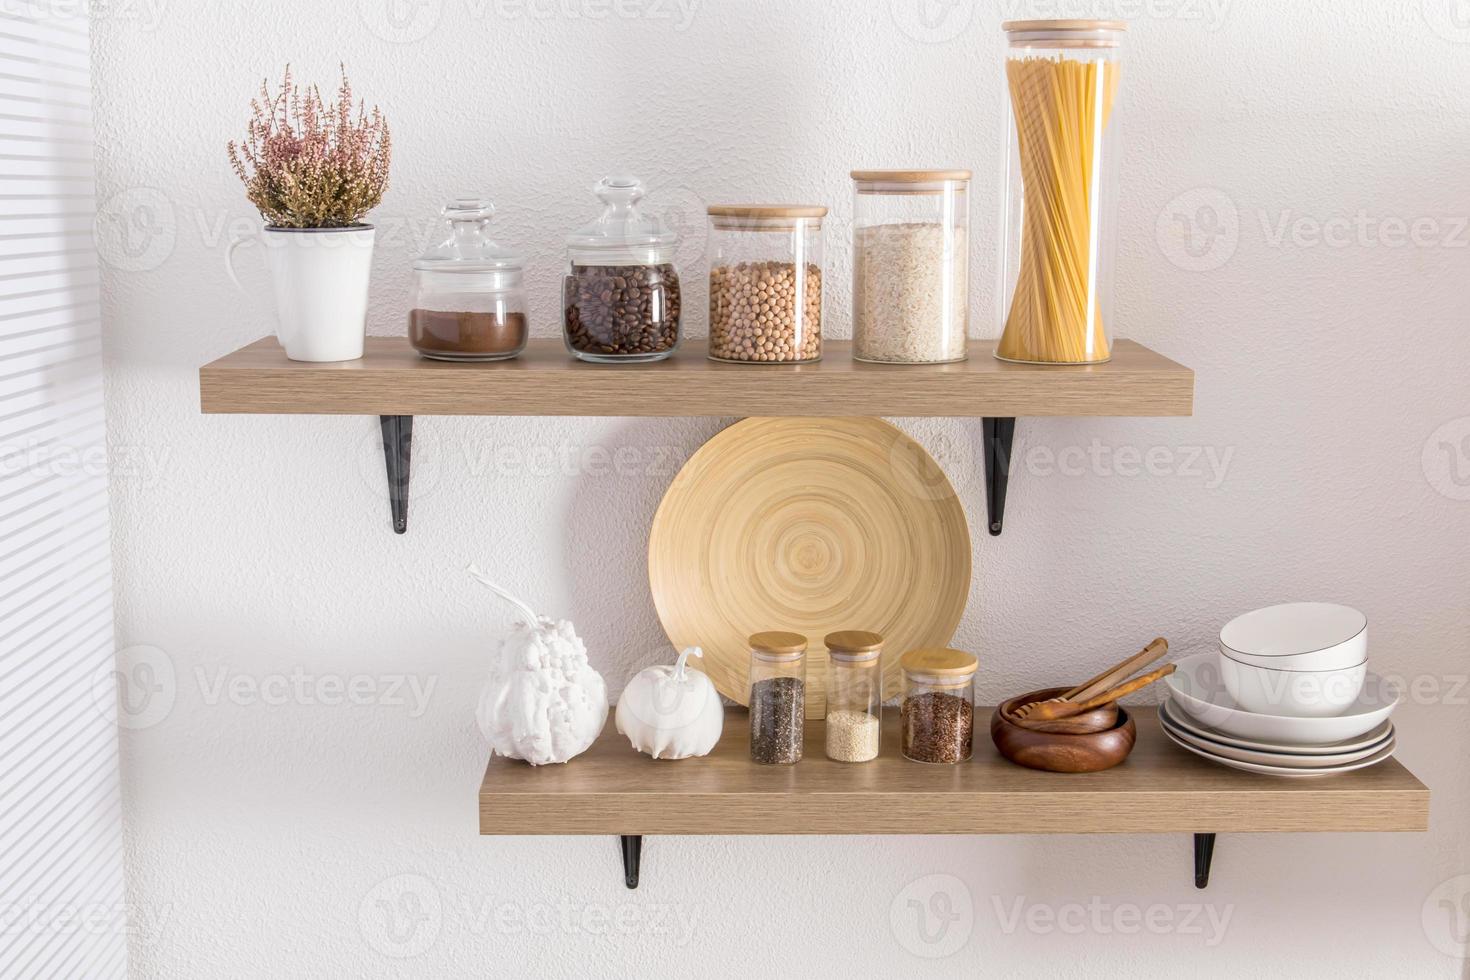 open wooden shelves with various glass jars with a wooden lid filled with spices, coffee, spaghetti. stylish decor in the modern kitchen. front view. photo